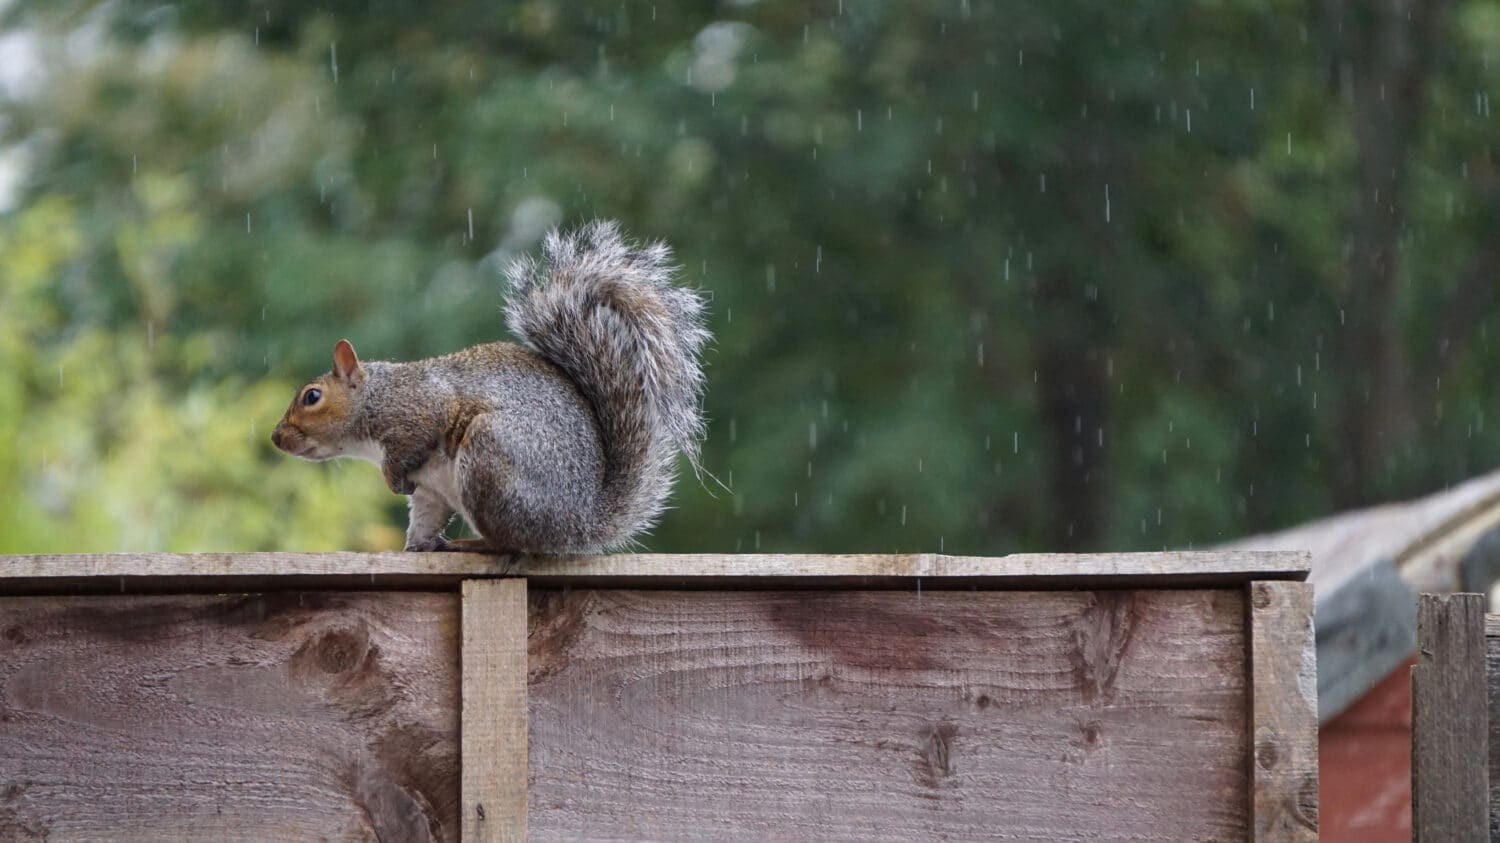 Grey squirrel sitting on top of brown wooden garden fence on a raining autumn day in front of green trees and leaves background, Manchester, United Kingdom